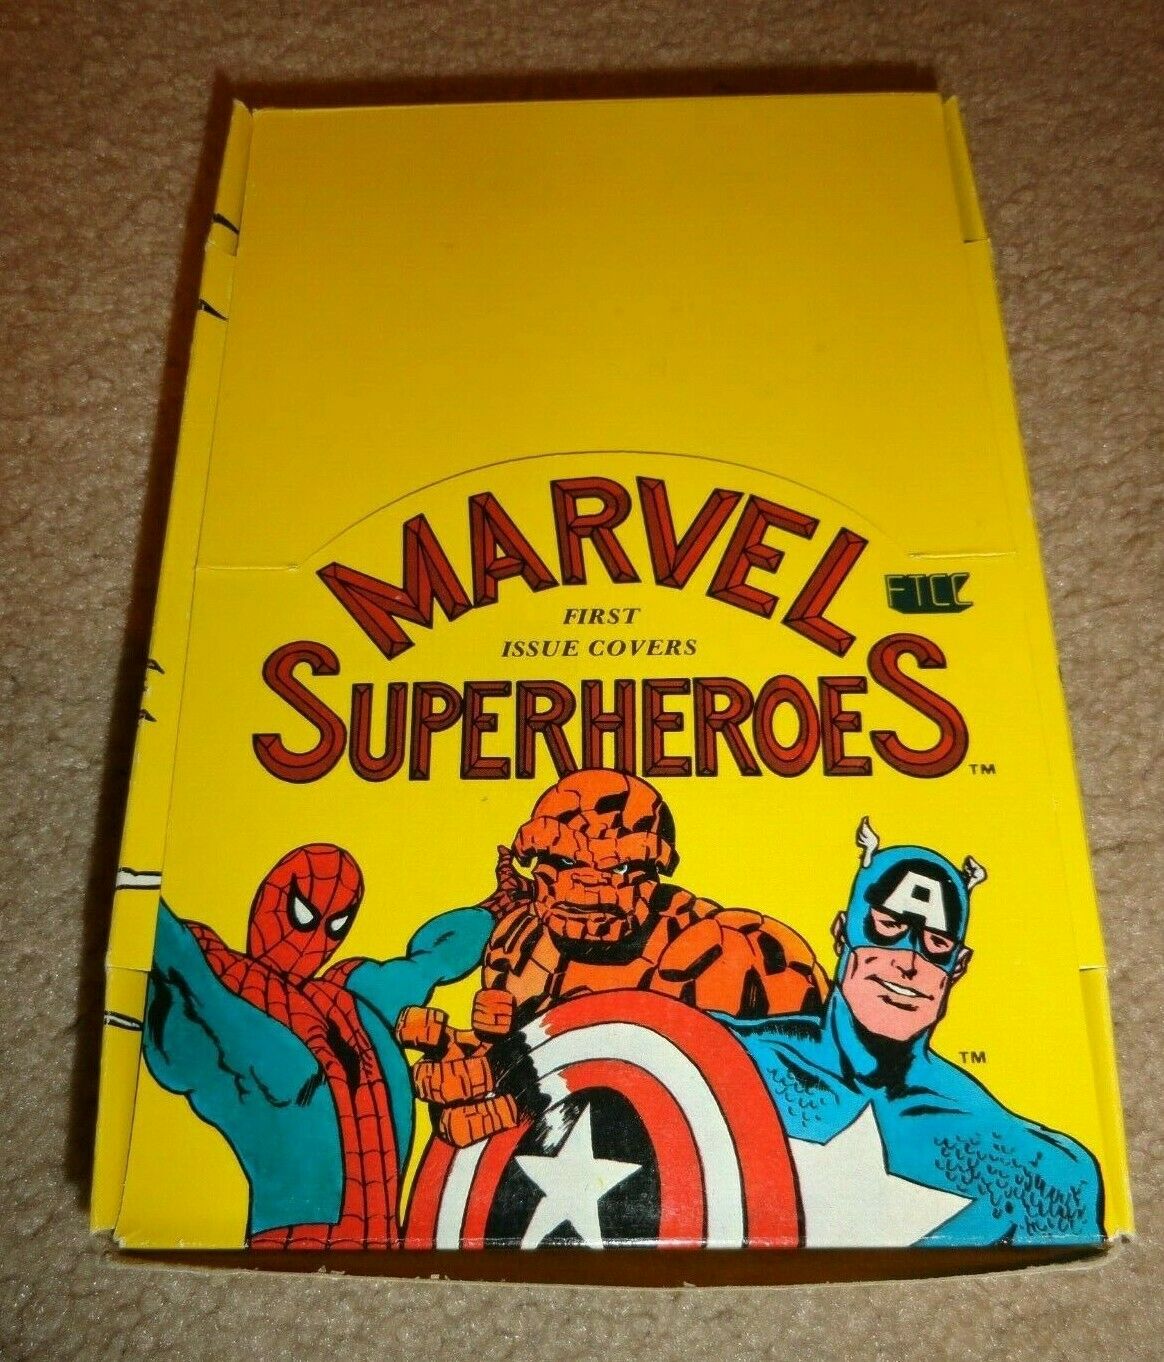 1984 Marvel Super Heroes First Issue Cover Empty Trading Card Box - No Packs